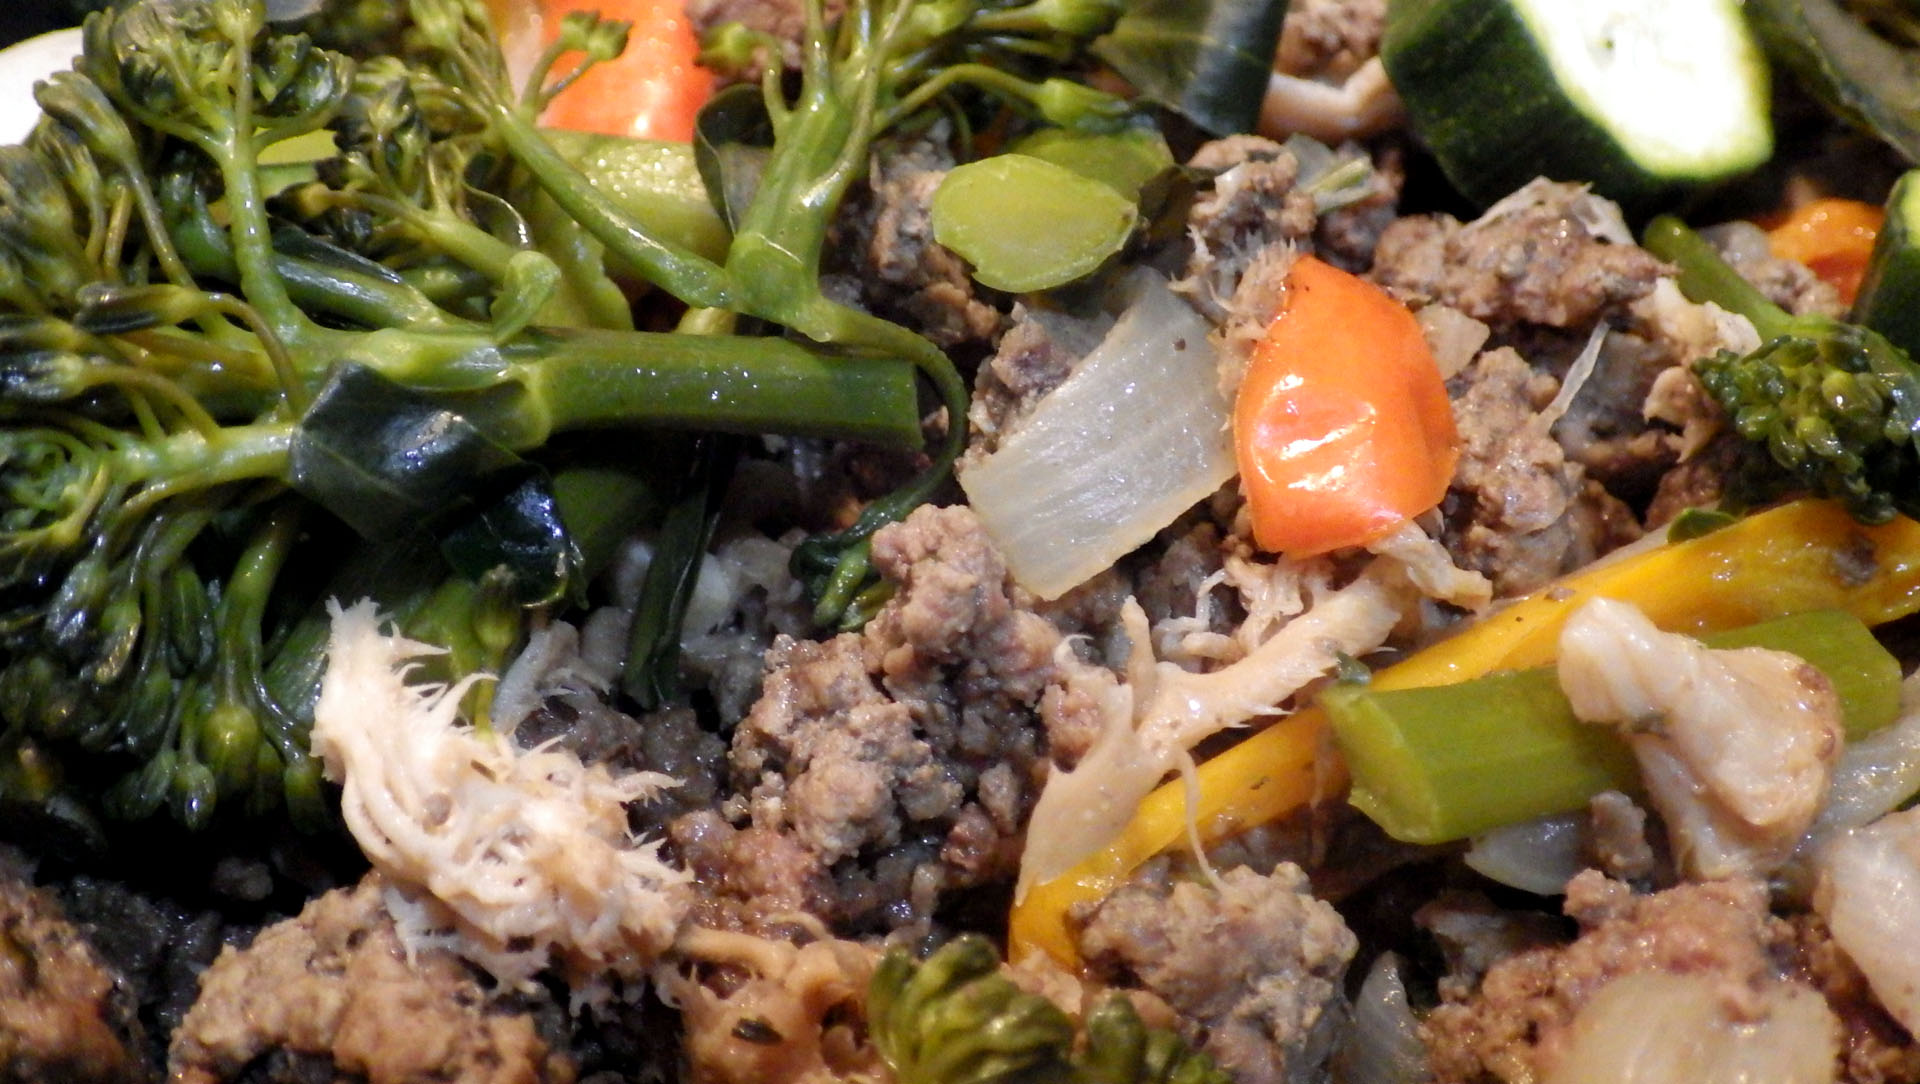 beef-coralloides-lionsmane-broccoli-peppers-onion